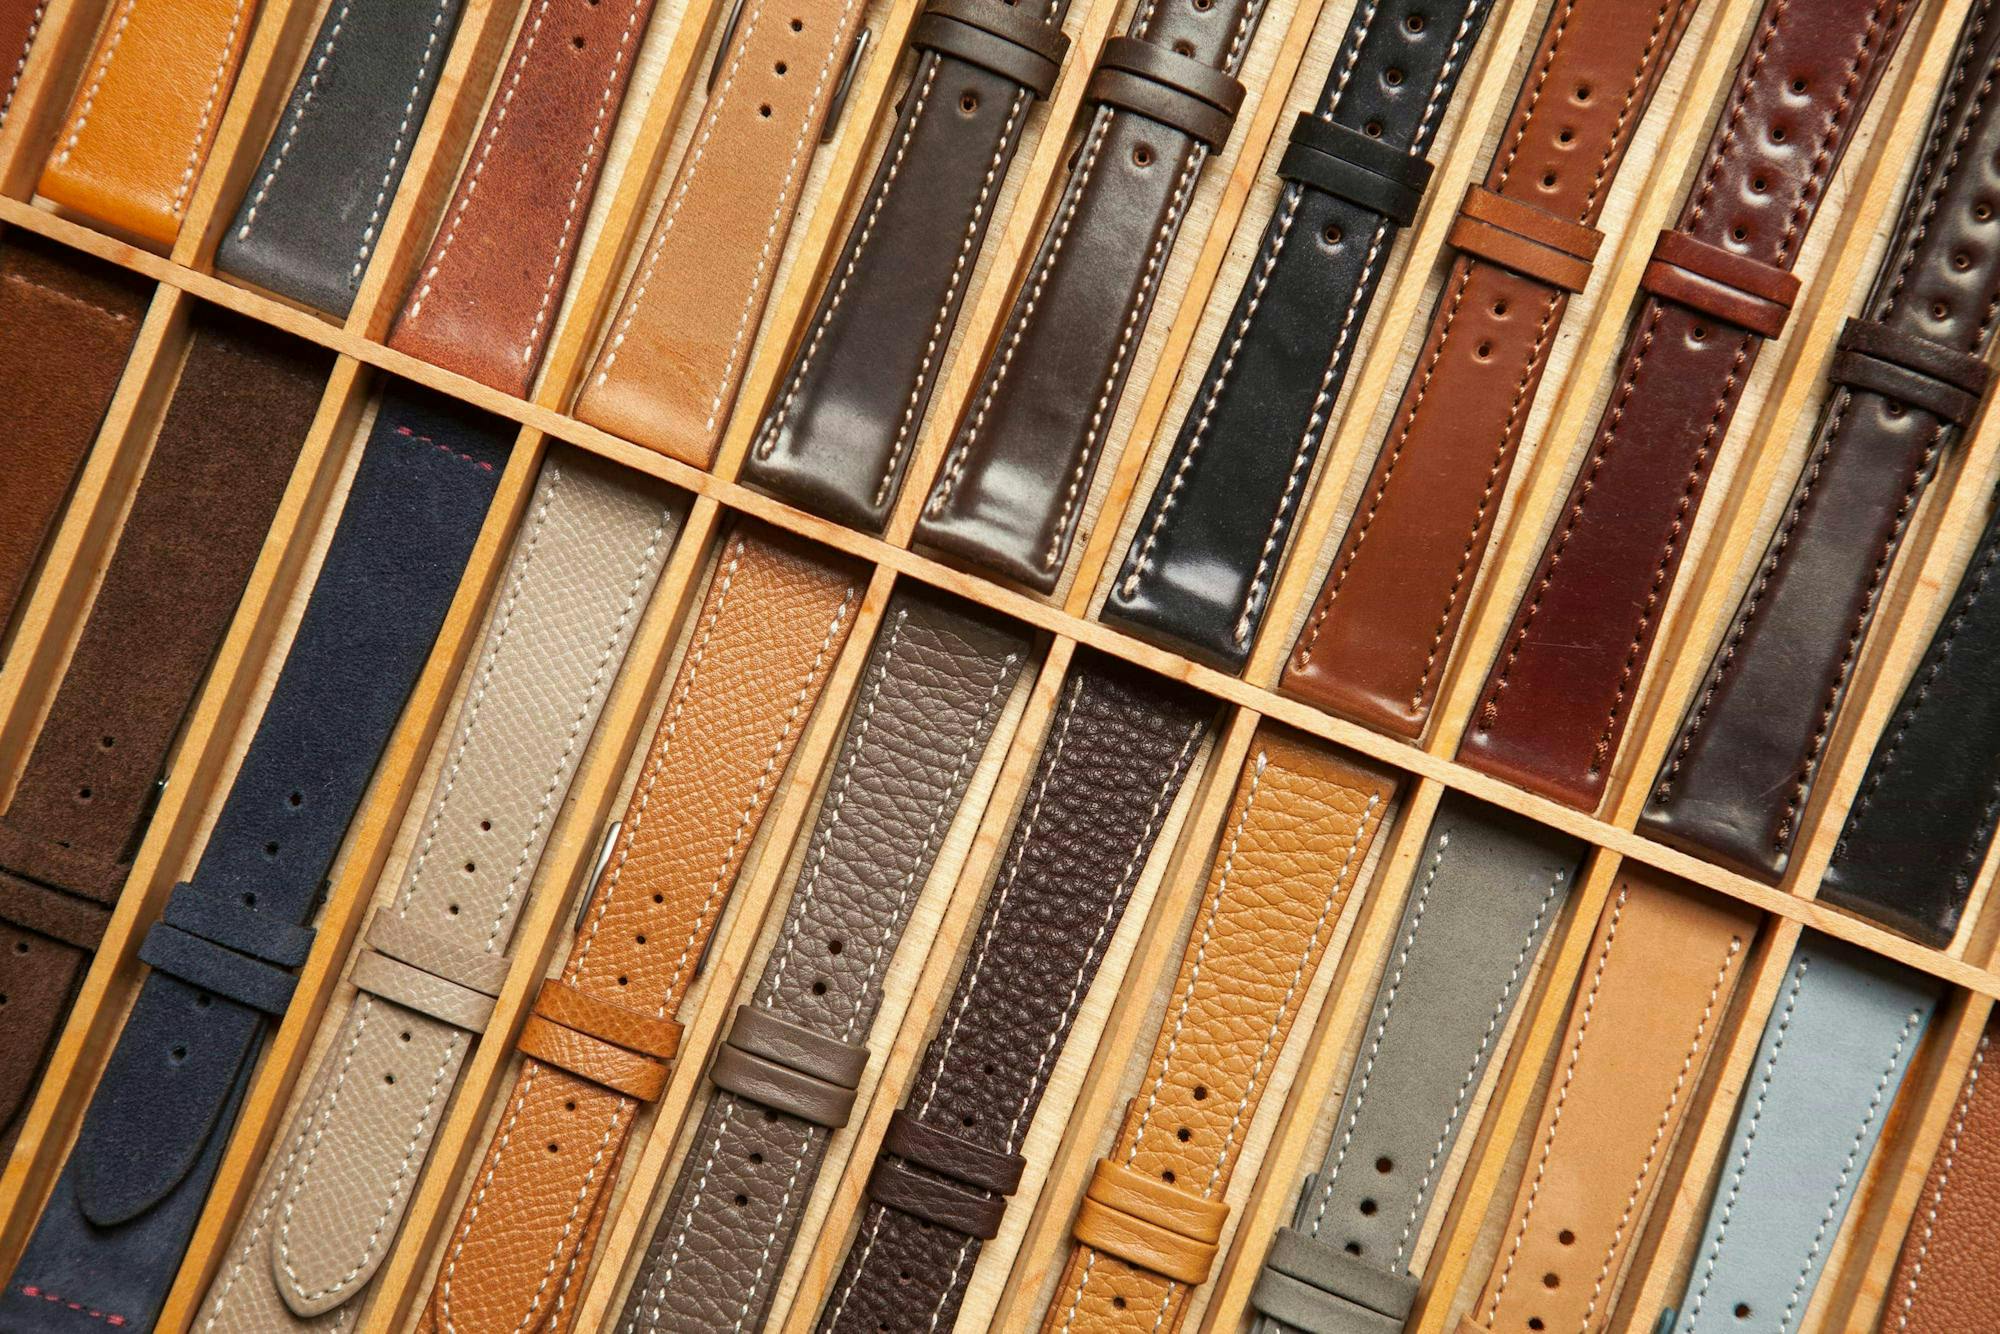 Several leather watch straps displayed in a wood case.